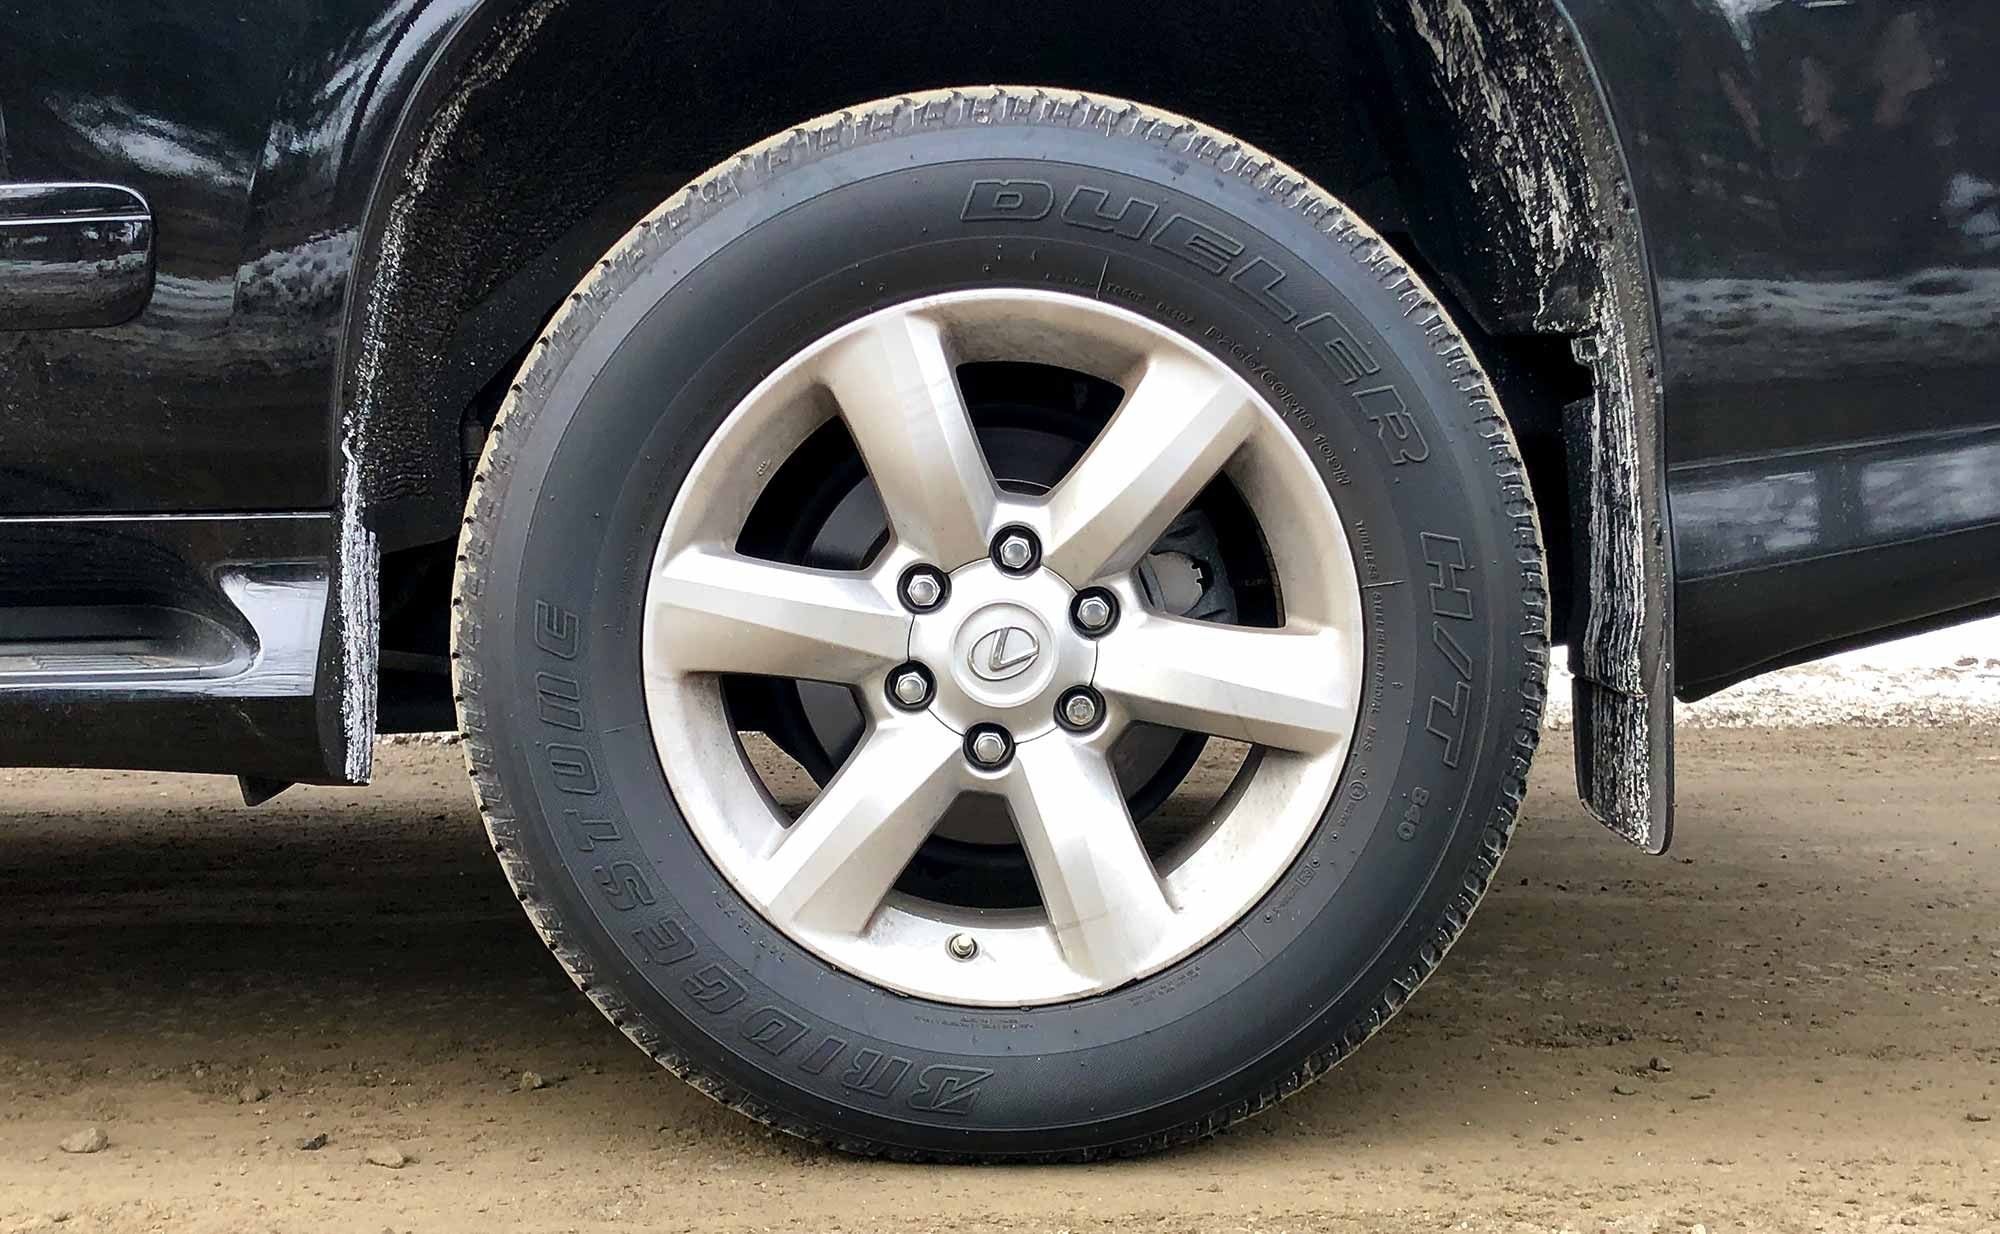 The stock 18-inch wheels are attractive but 17-inch will suit our purposes better, as will a set of all-terrain tires. More on this in the near future.